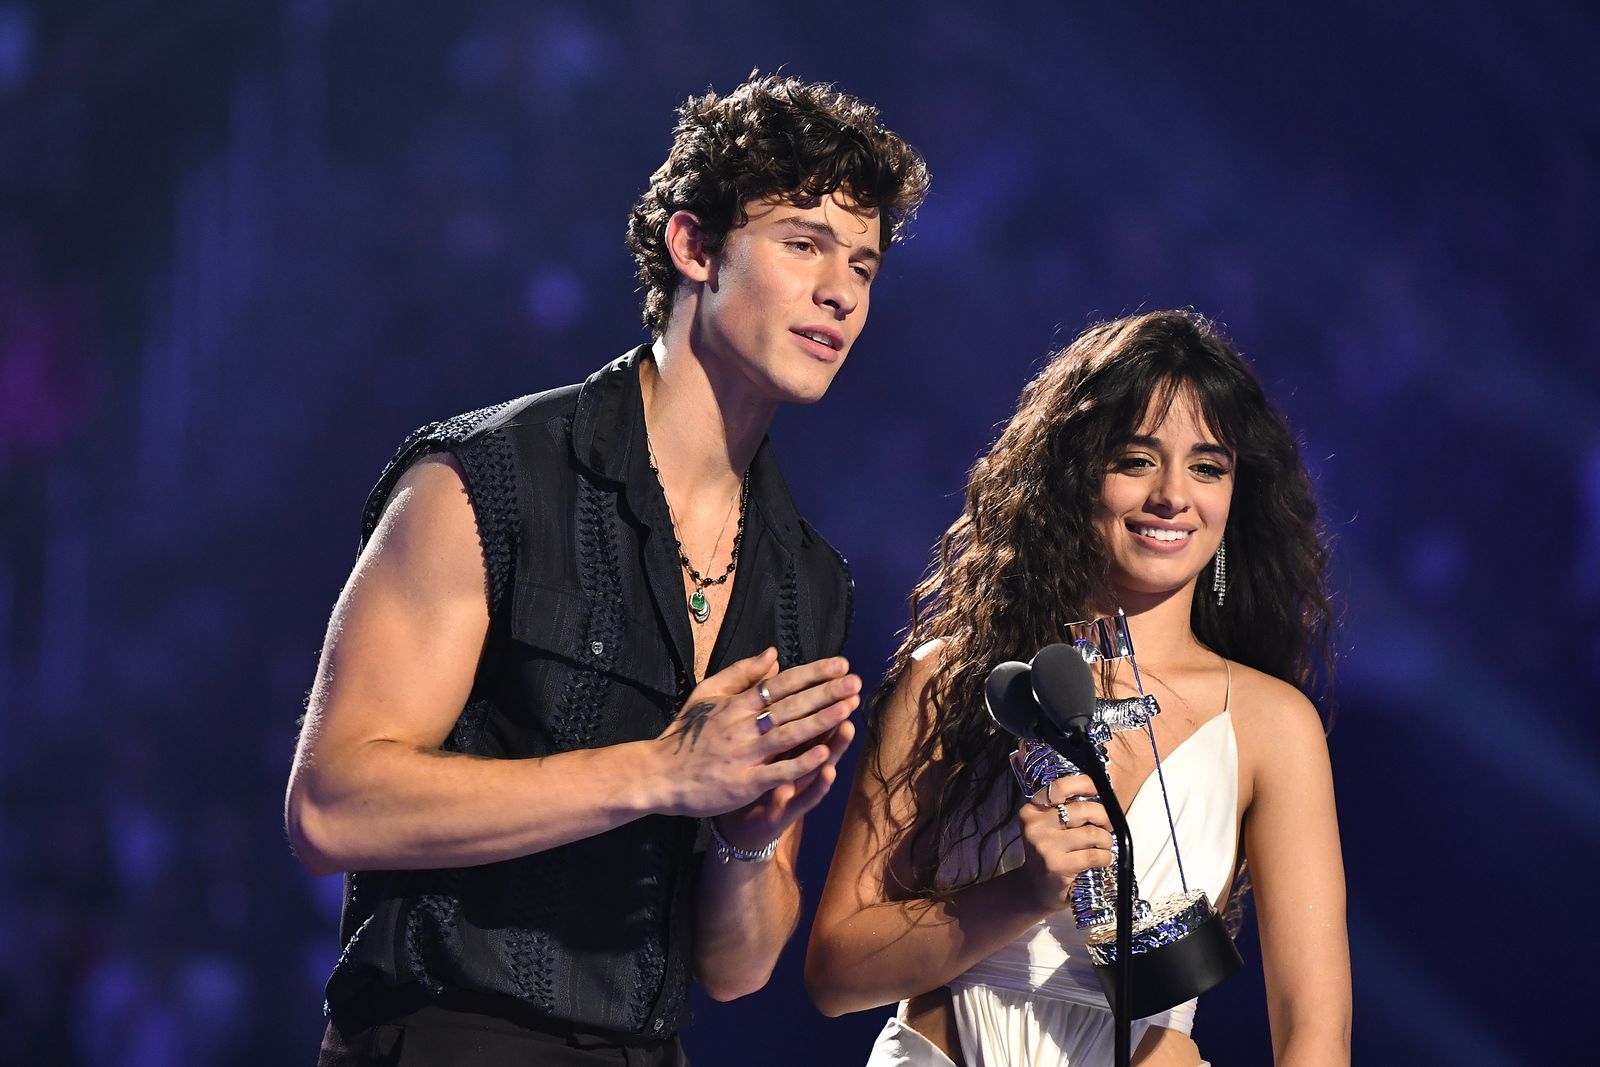 Shawn Mendes and Camila Cabello receive 'Best Collaboration' award onstage at the 2019 MTV Video Music Awards at Prudential Center on August 26, 2019 | Photo: Getty Images